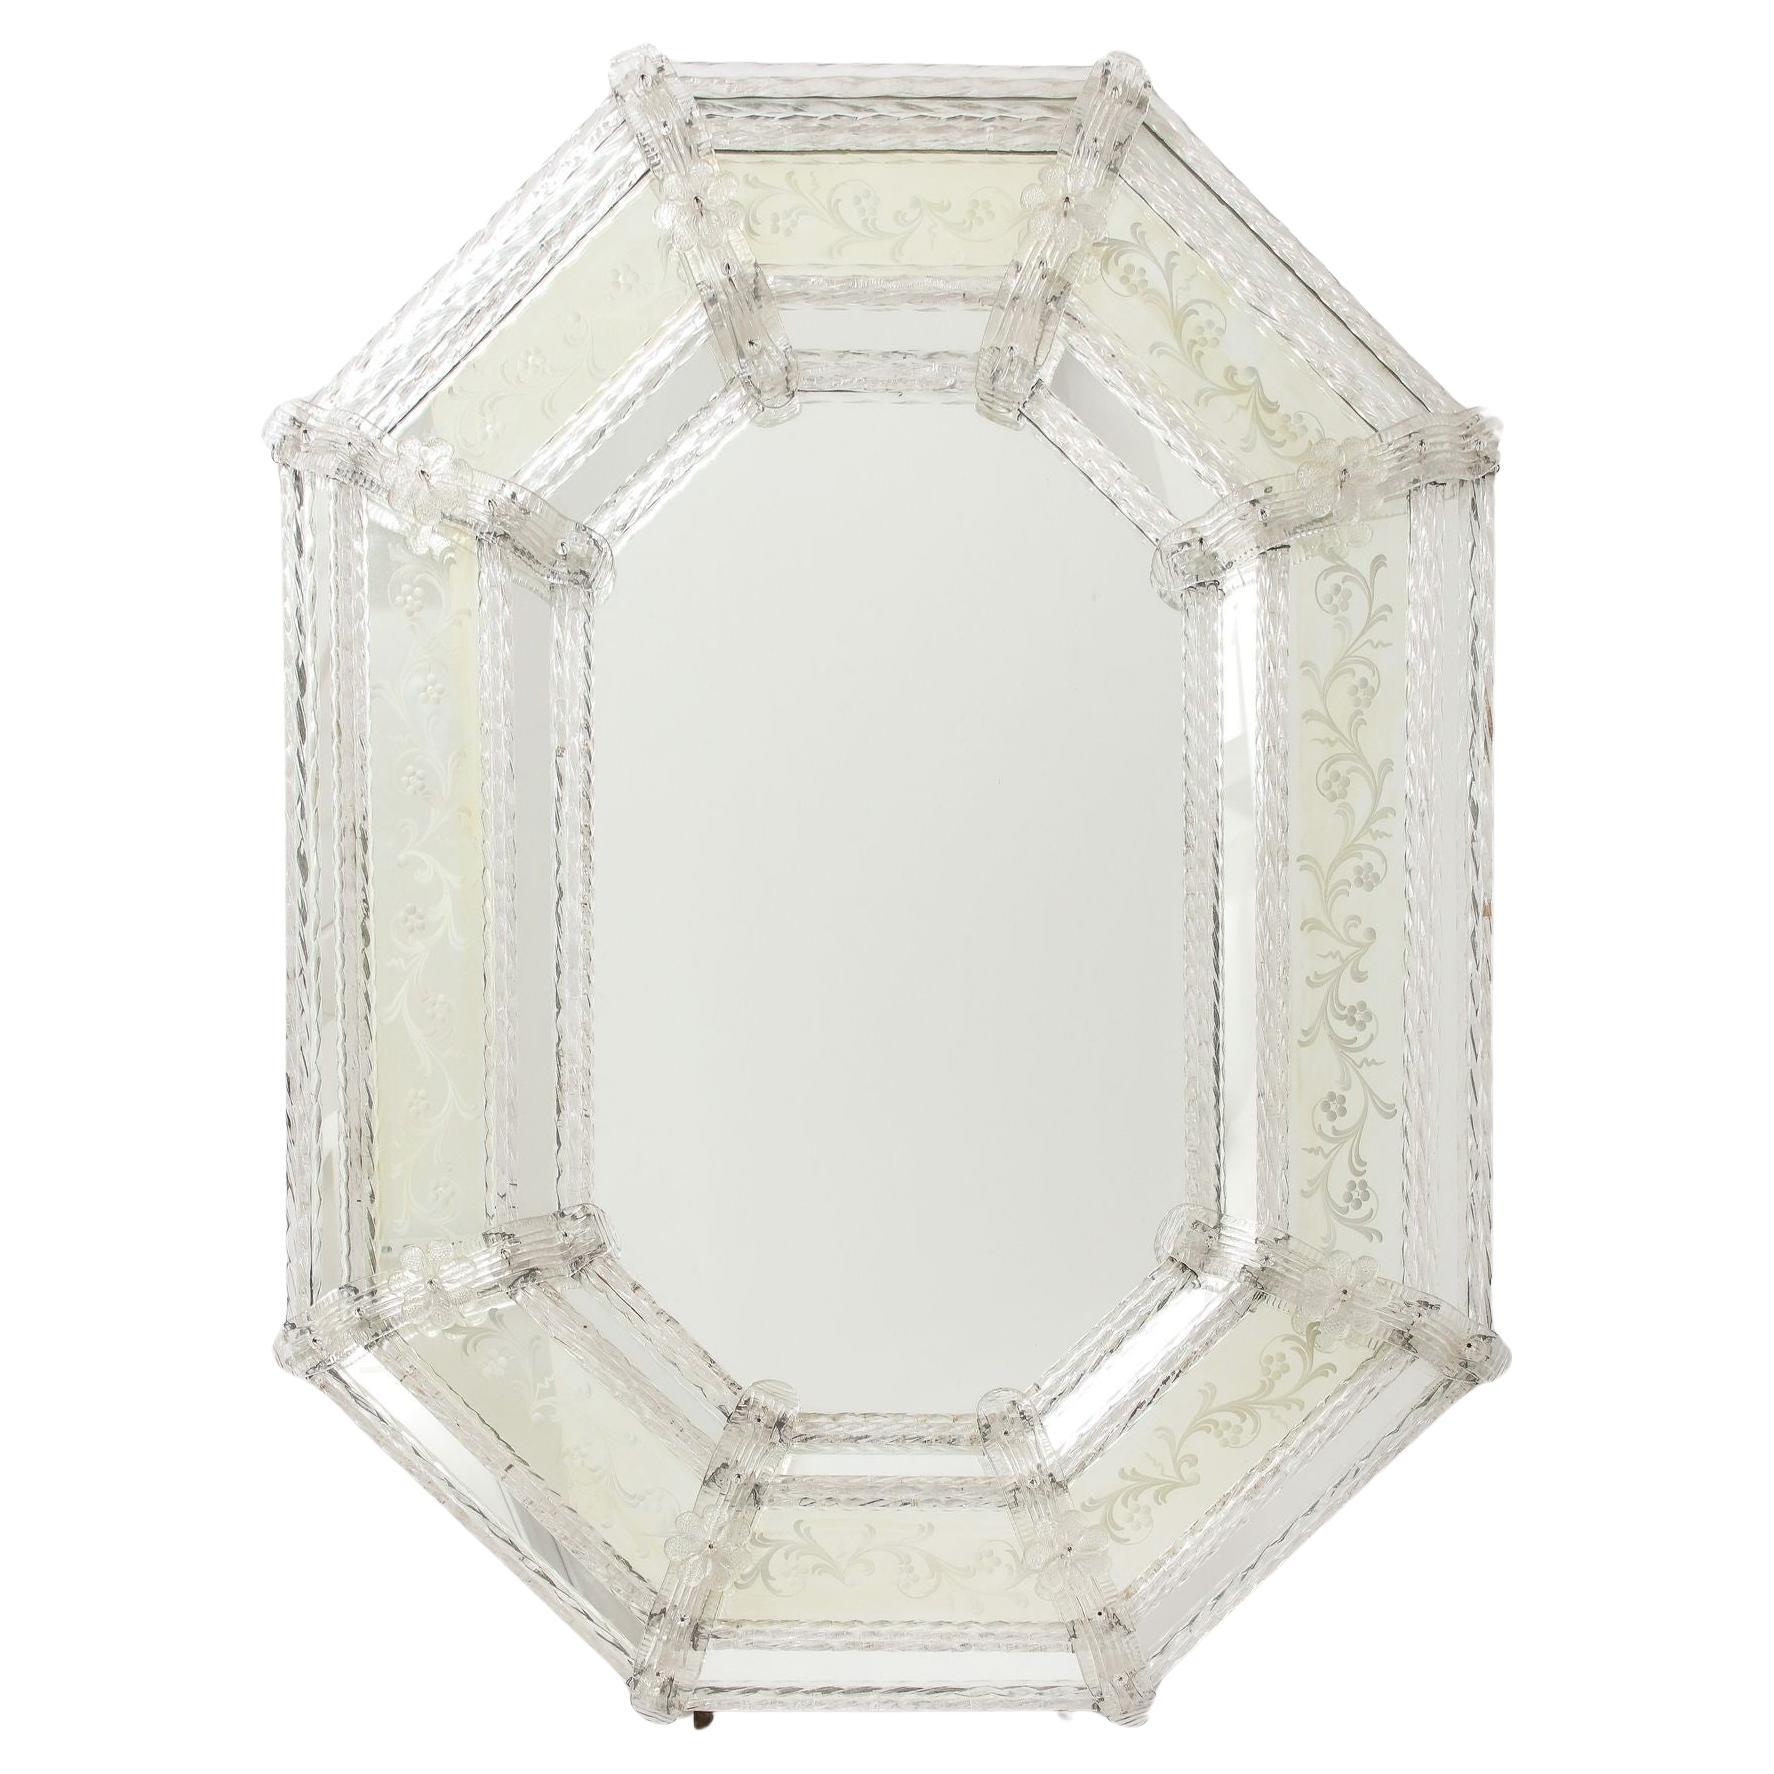 Venetian Hexagonal Shape Wall  Mirror. With Wide Border Etched Design  For Sale